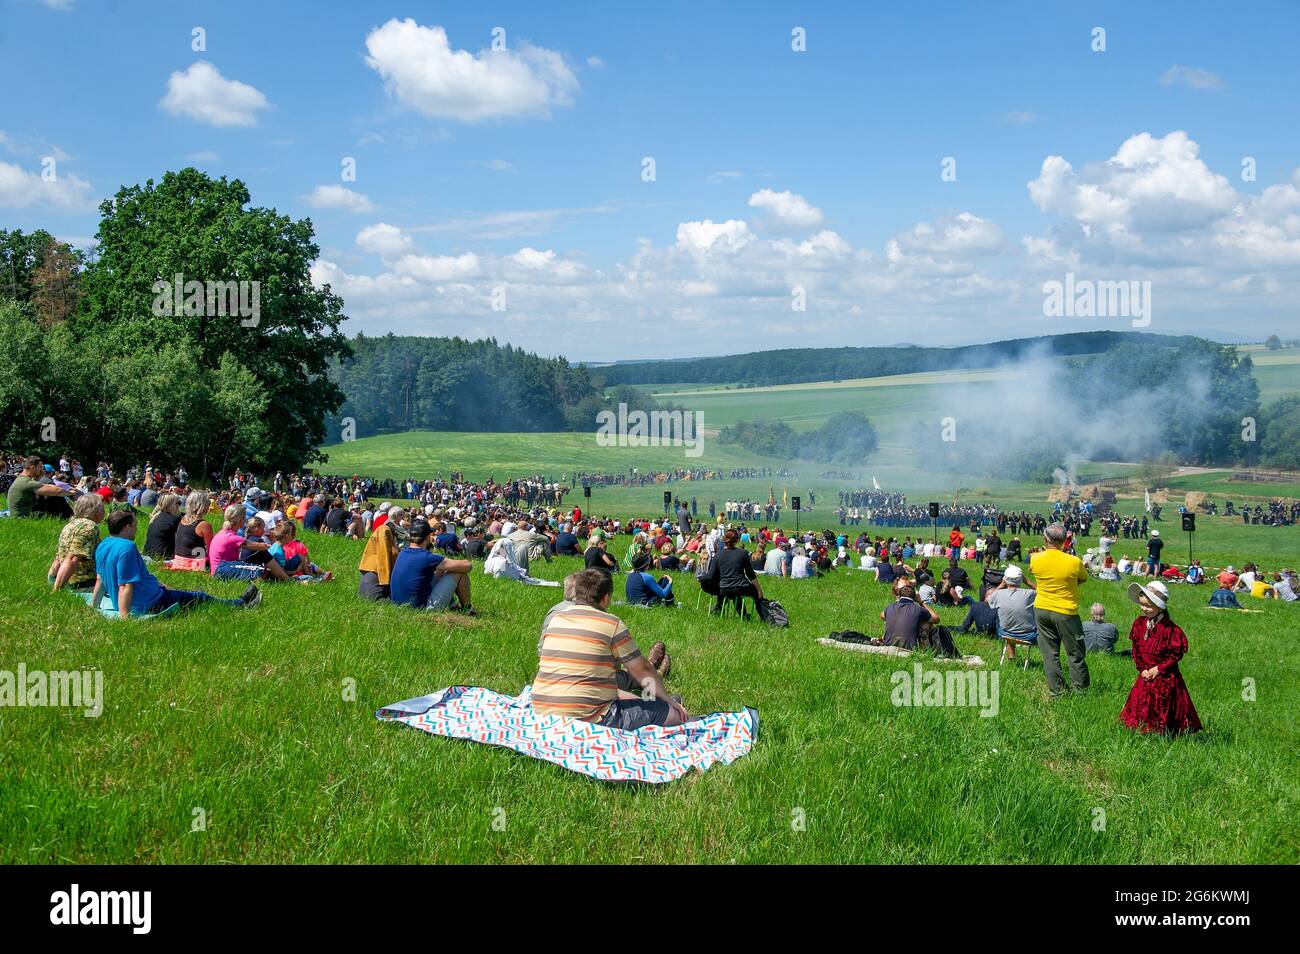 Chlum, Czech Republic. 03rd July, 2021. The Battle of Koniggratz that had occurred between Austrian and Prussian soldiers in 1866 was re-enacted on the battlefield in Chlum, Czech Republic, on July 3, 2021, and roughly 1,500 people came to see it. Credit: David Tanecek/CTK Photo/Alamy Live News Stock Photo